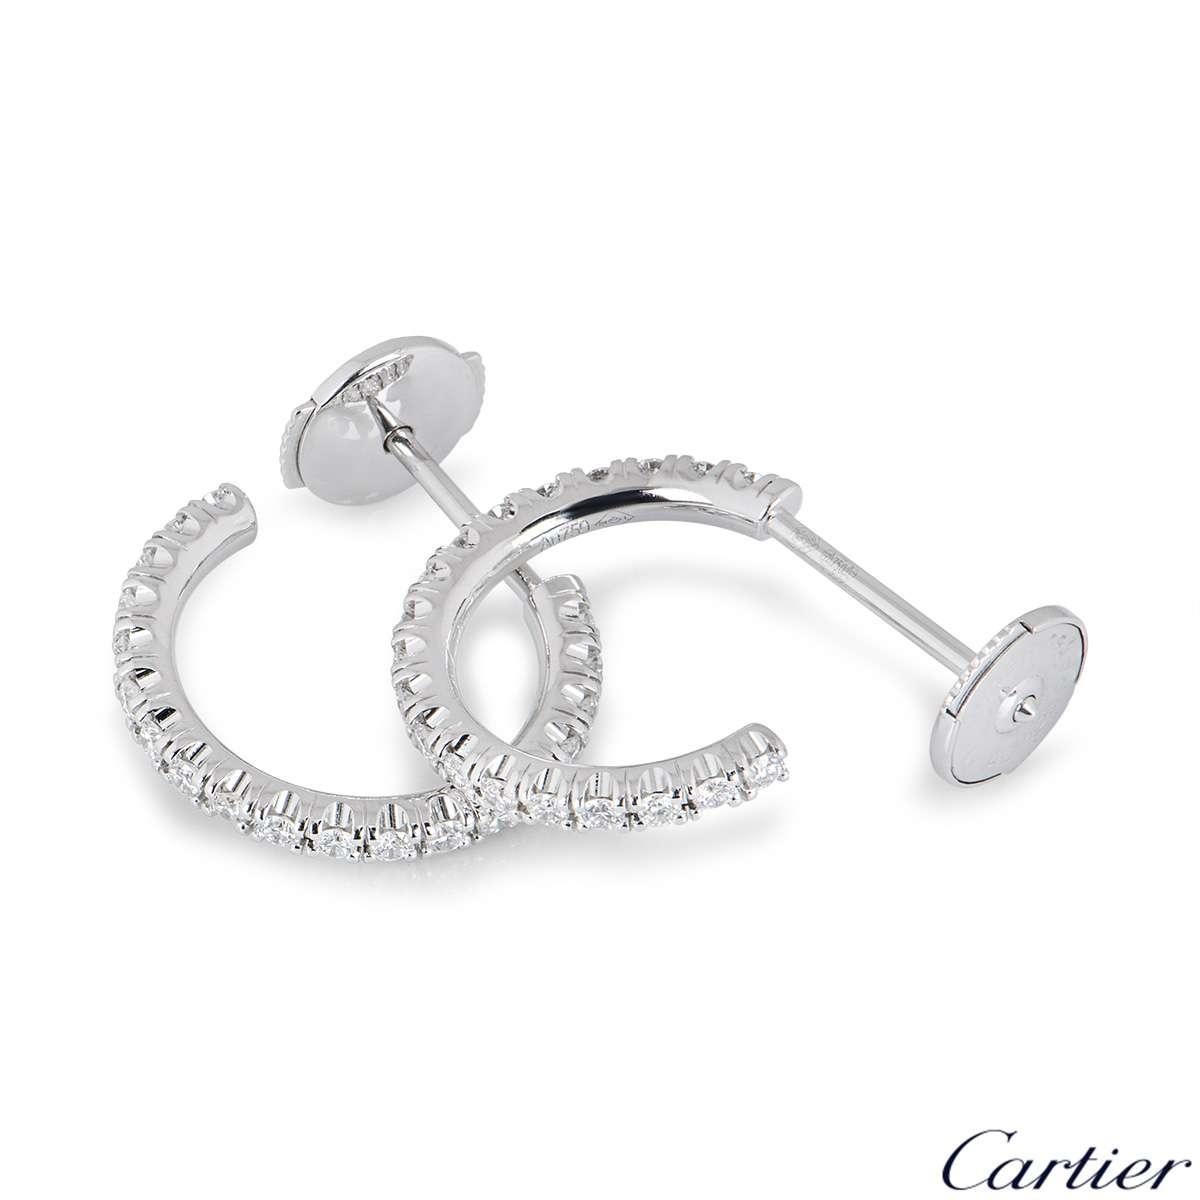 A pair of 18k white gold hoop earrings from the Etincelle de Cartier collection. Each earring is set with 19 round brilliant cut diamonds with a total weight of 0.13ct. The earrings measure 1.4cm in diameter and feature posts with alpha back